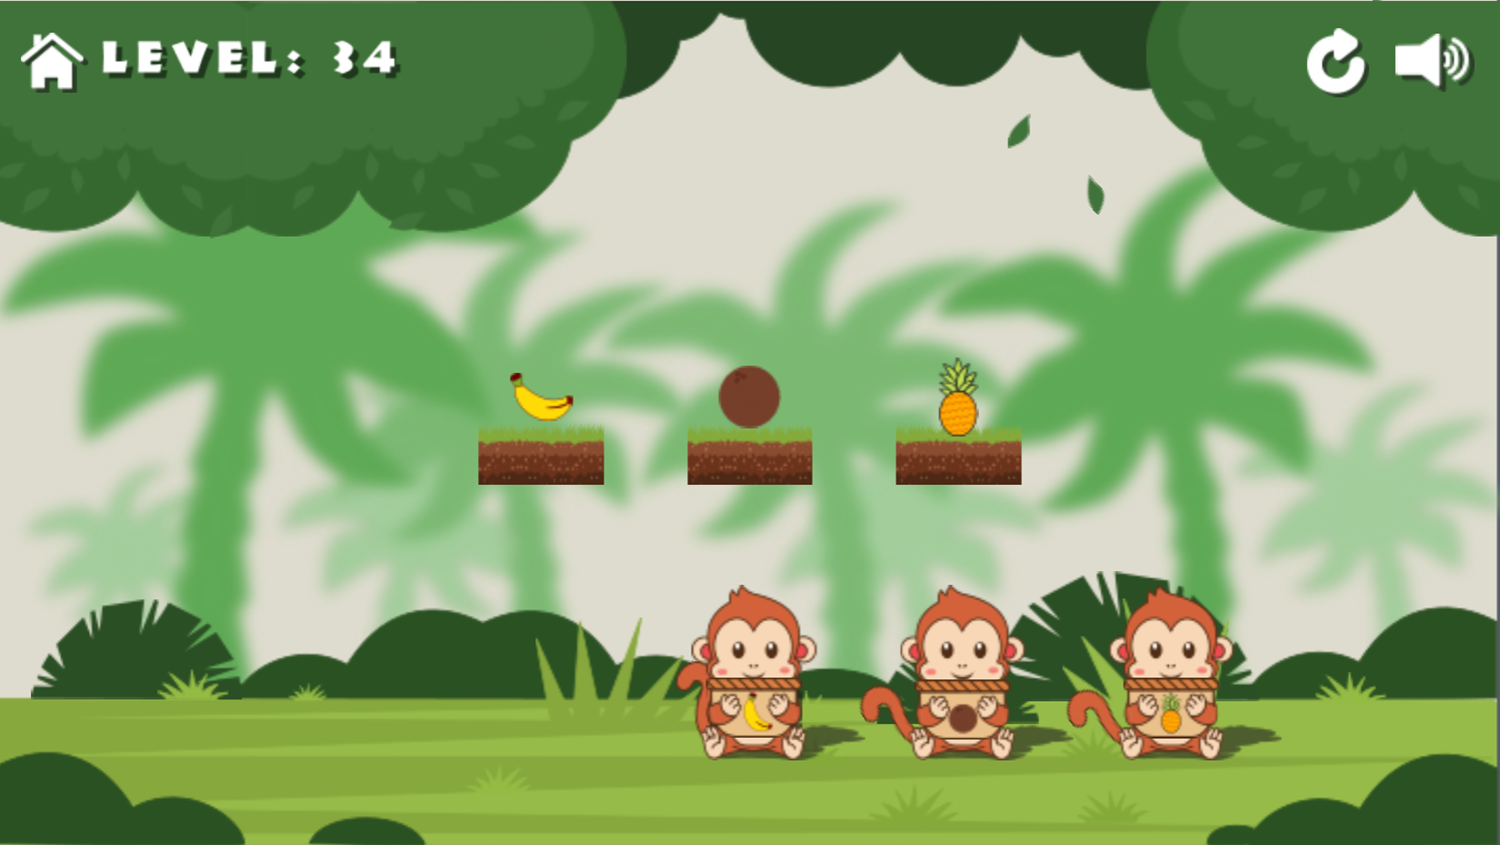 Monkeys and Fruits Game Level With Moving Monkeys Screenshot.